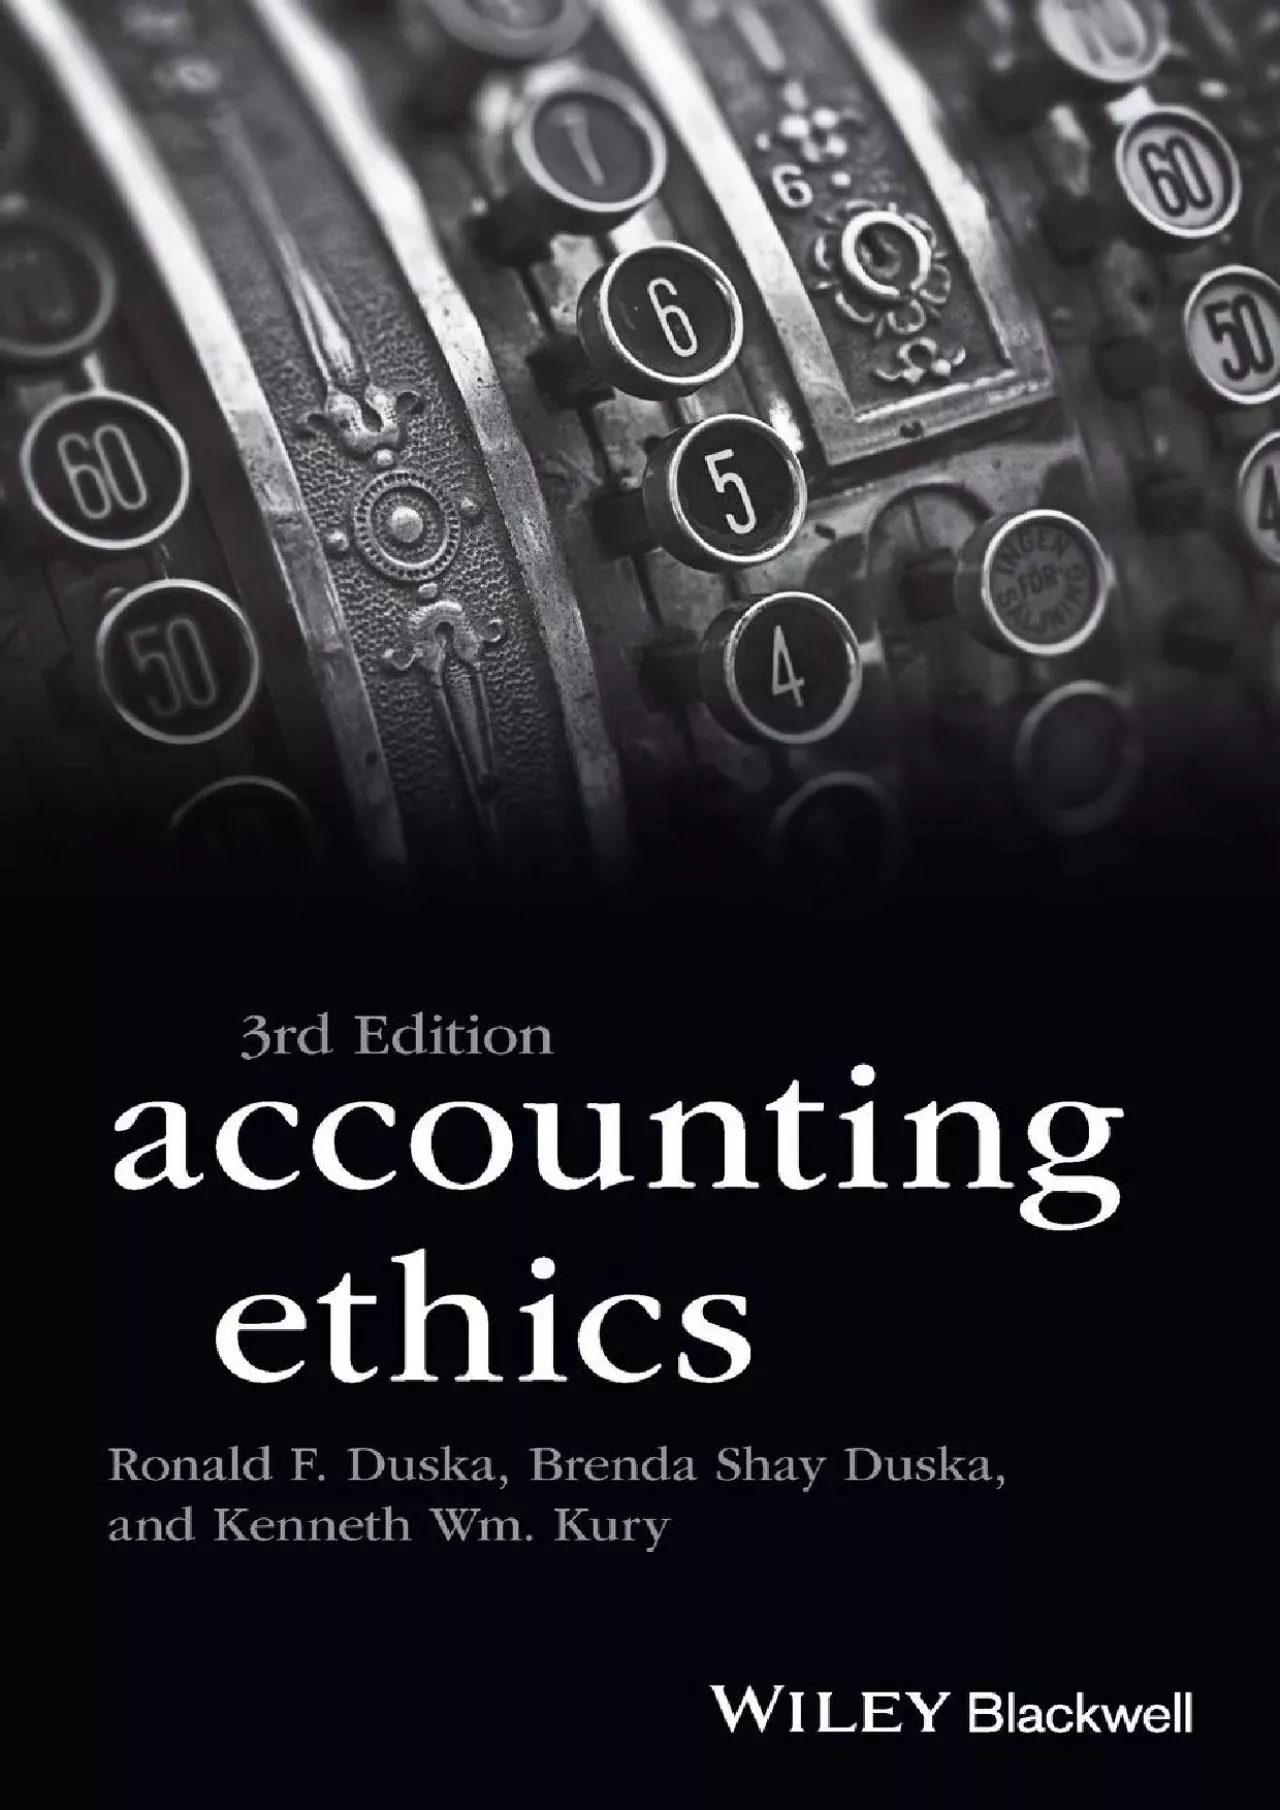 (EBOOK)-Accounting Ethics (Foundations of Business Ethics)